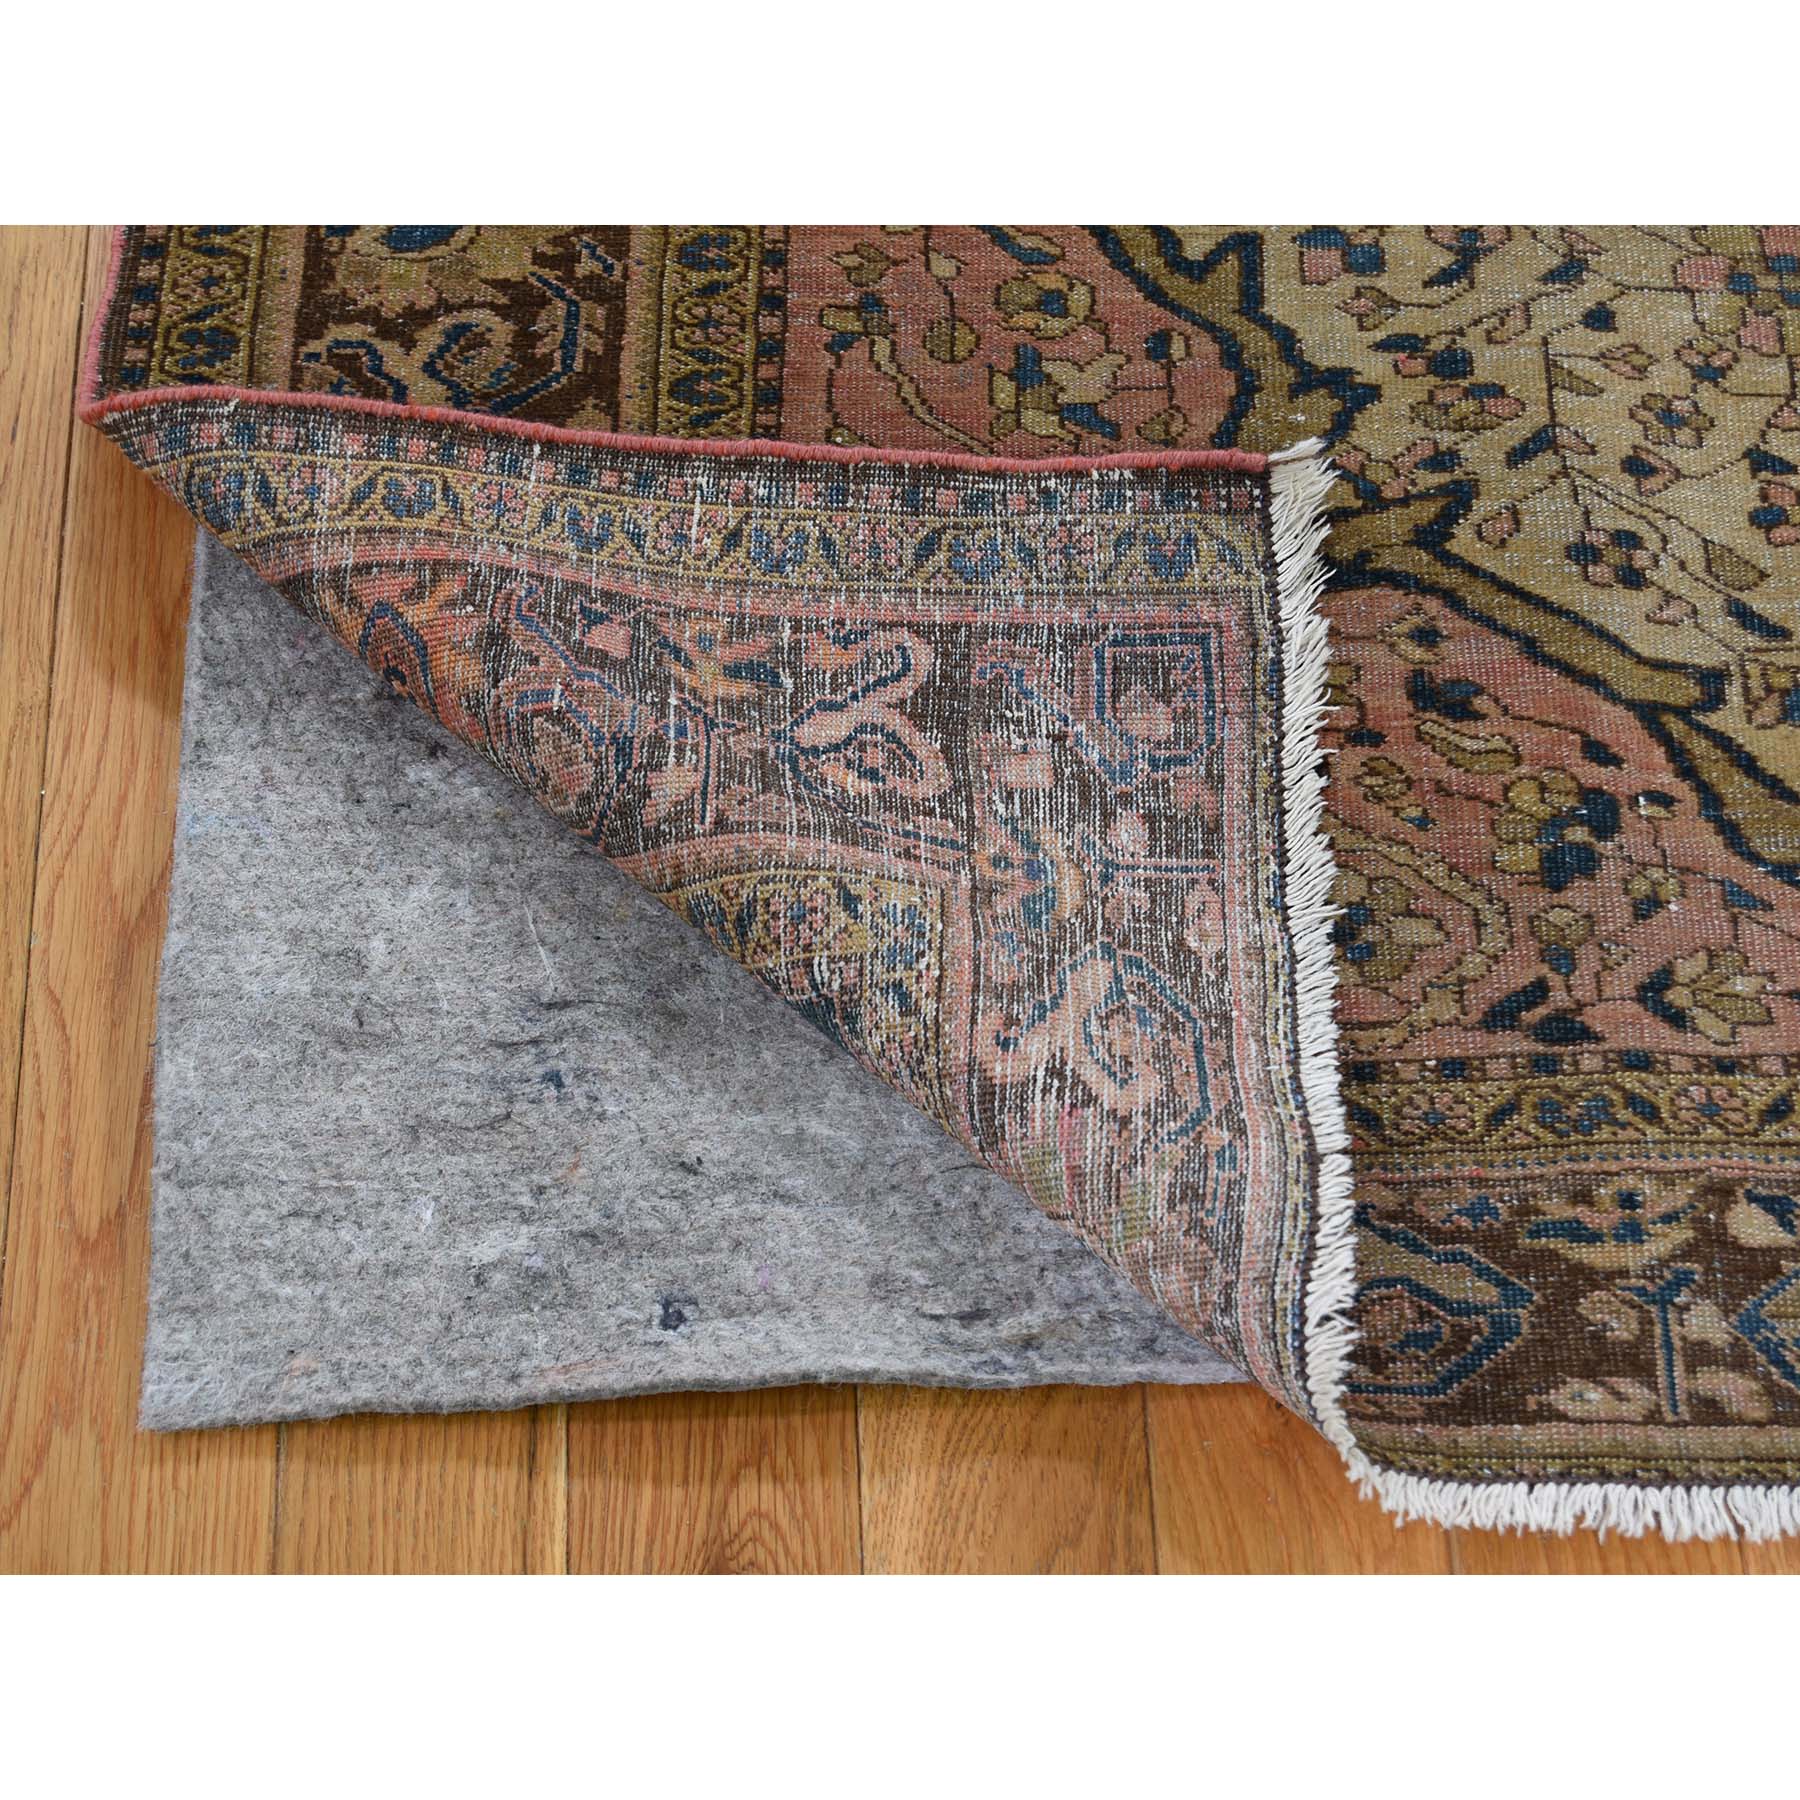 4-5 x6-6  Tan Antique Persian Sarouk Fereghan Even Wear Hand-Knotted Oriental Rug 